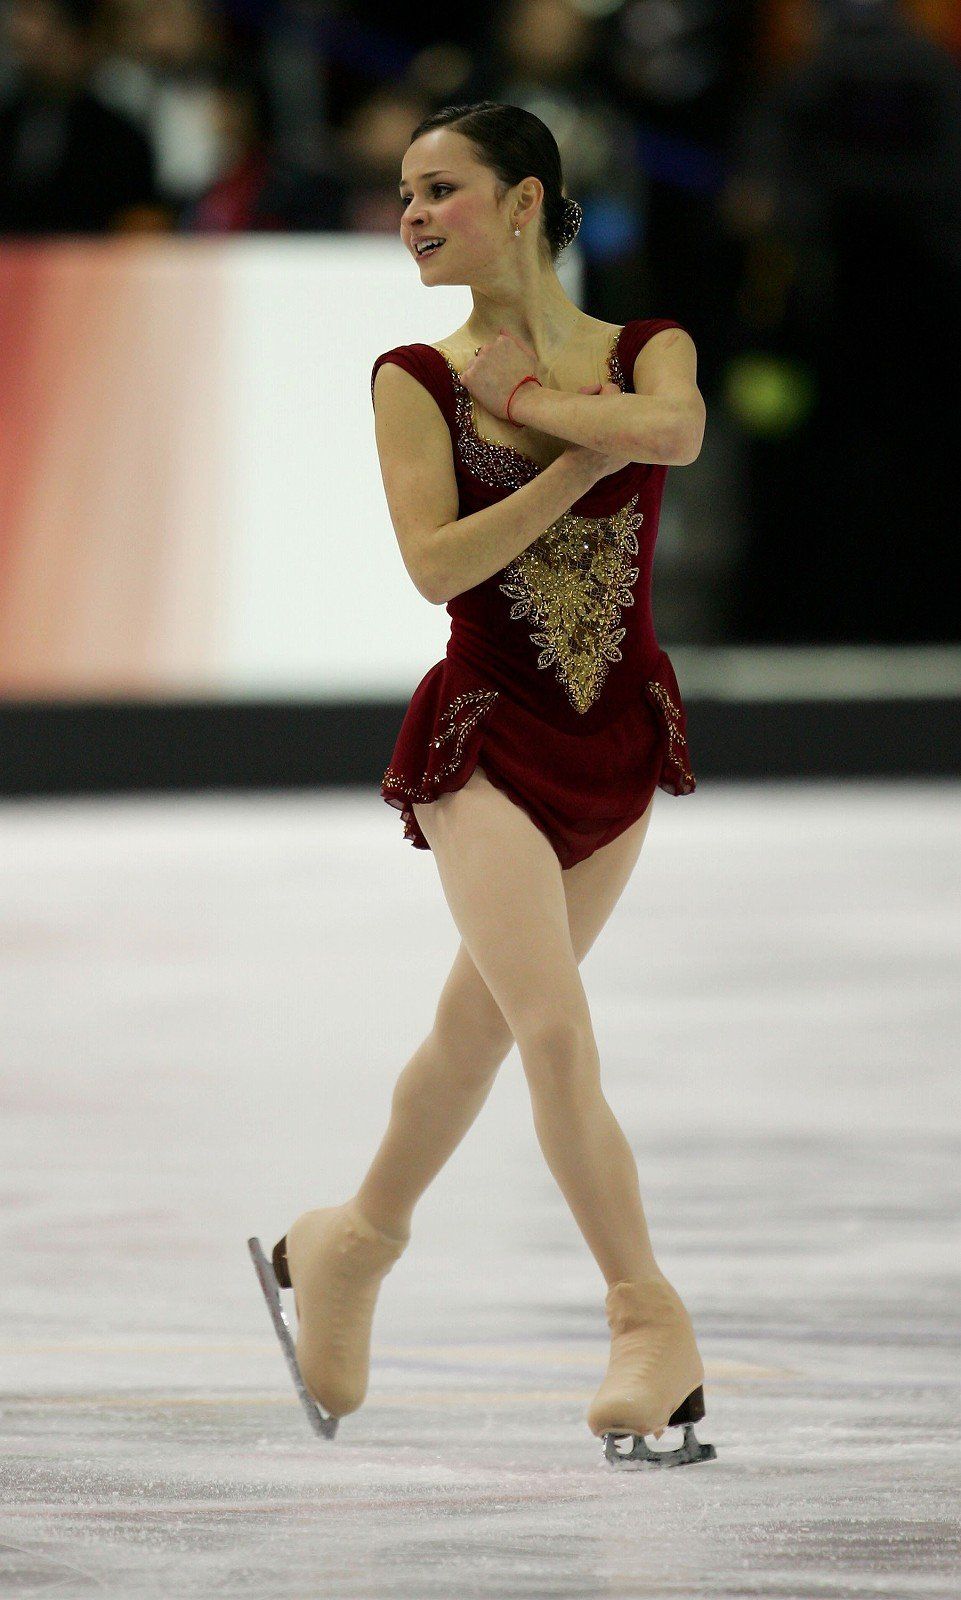 Human leg, Human body, Ice skate, Joint, Performing arts, Thigh, Knee, Fashion, Trunk, Youth, 